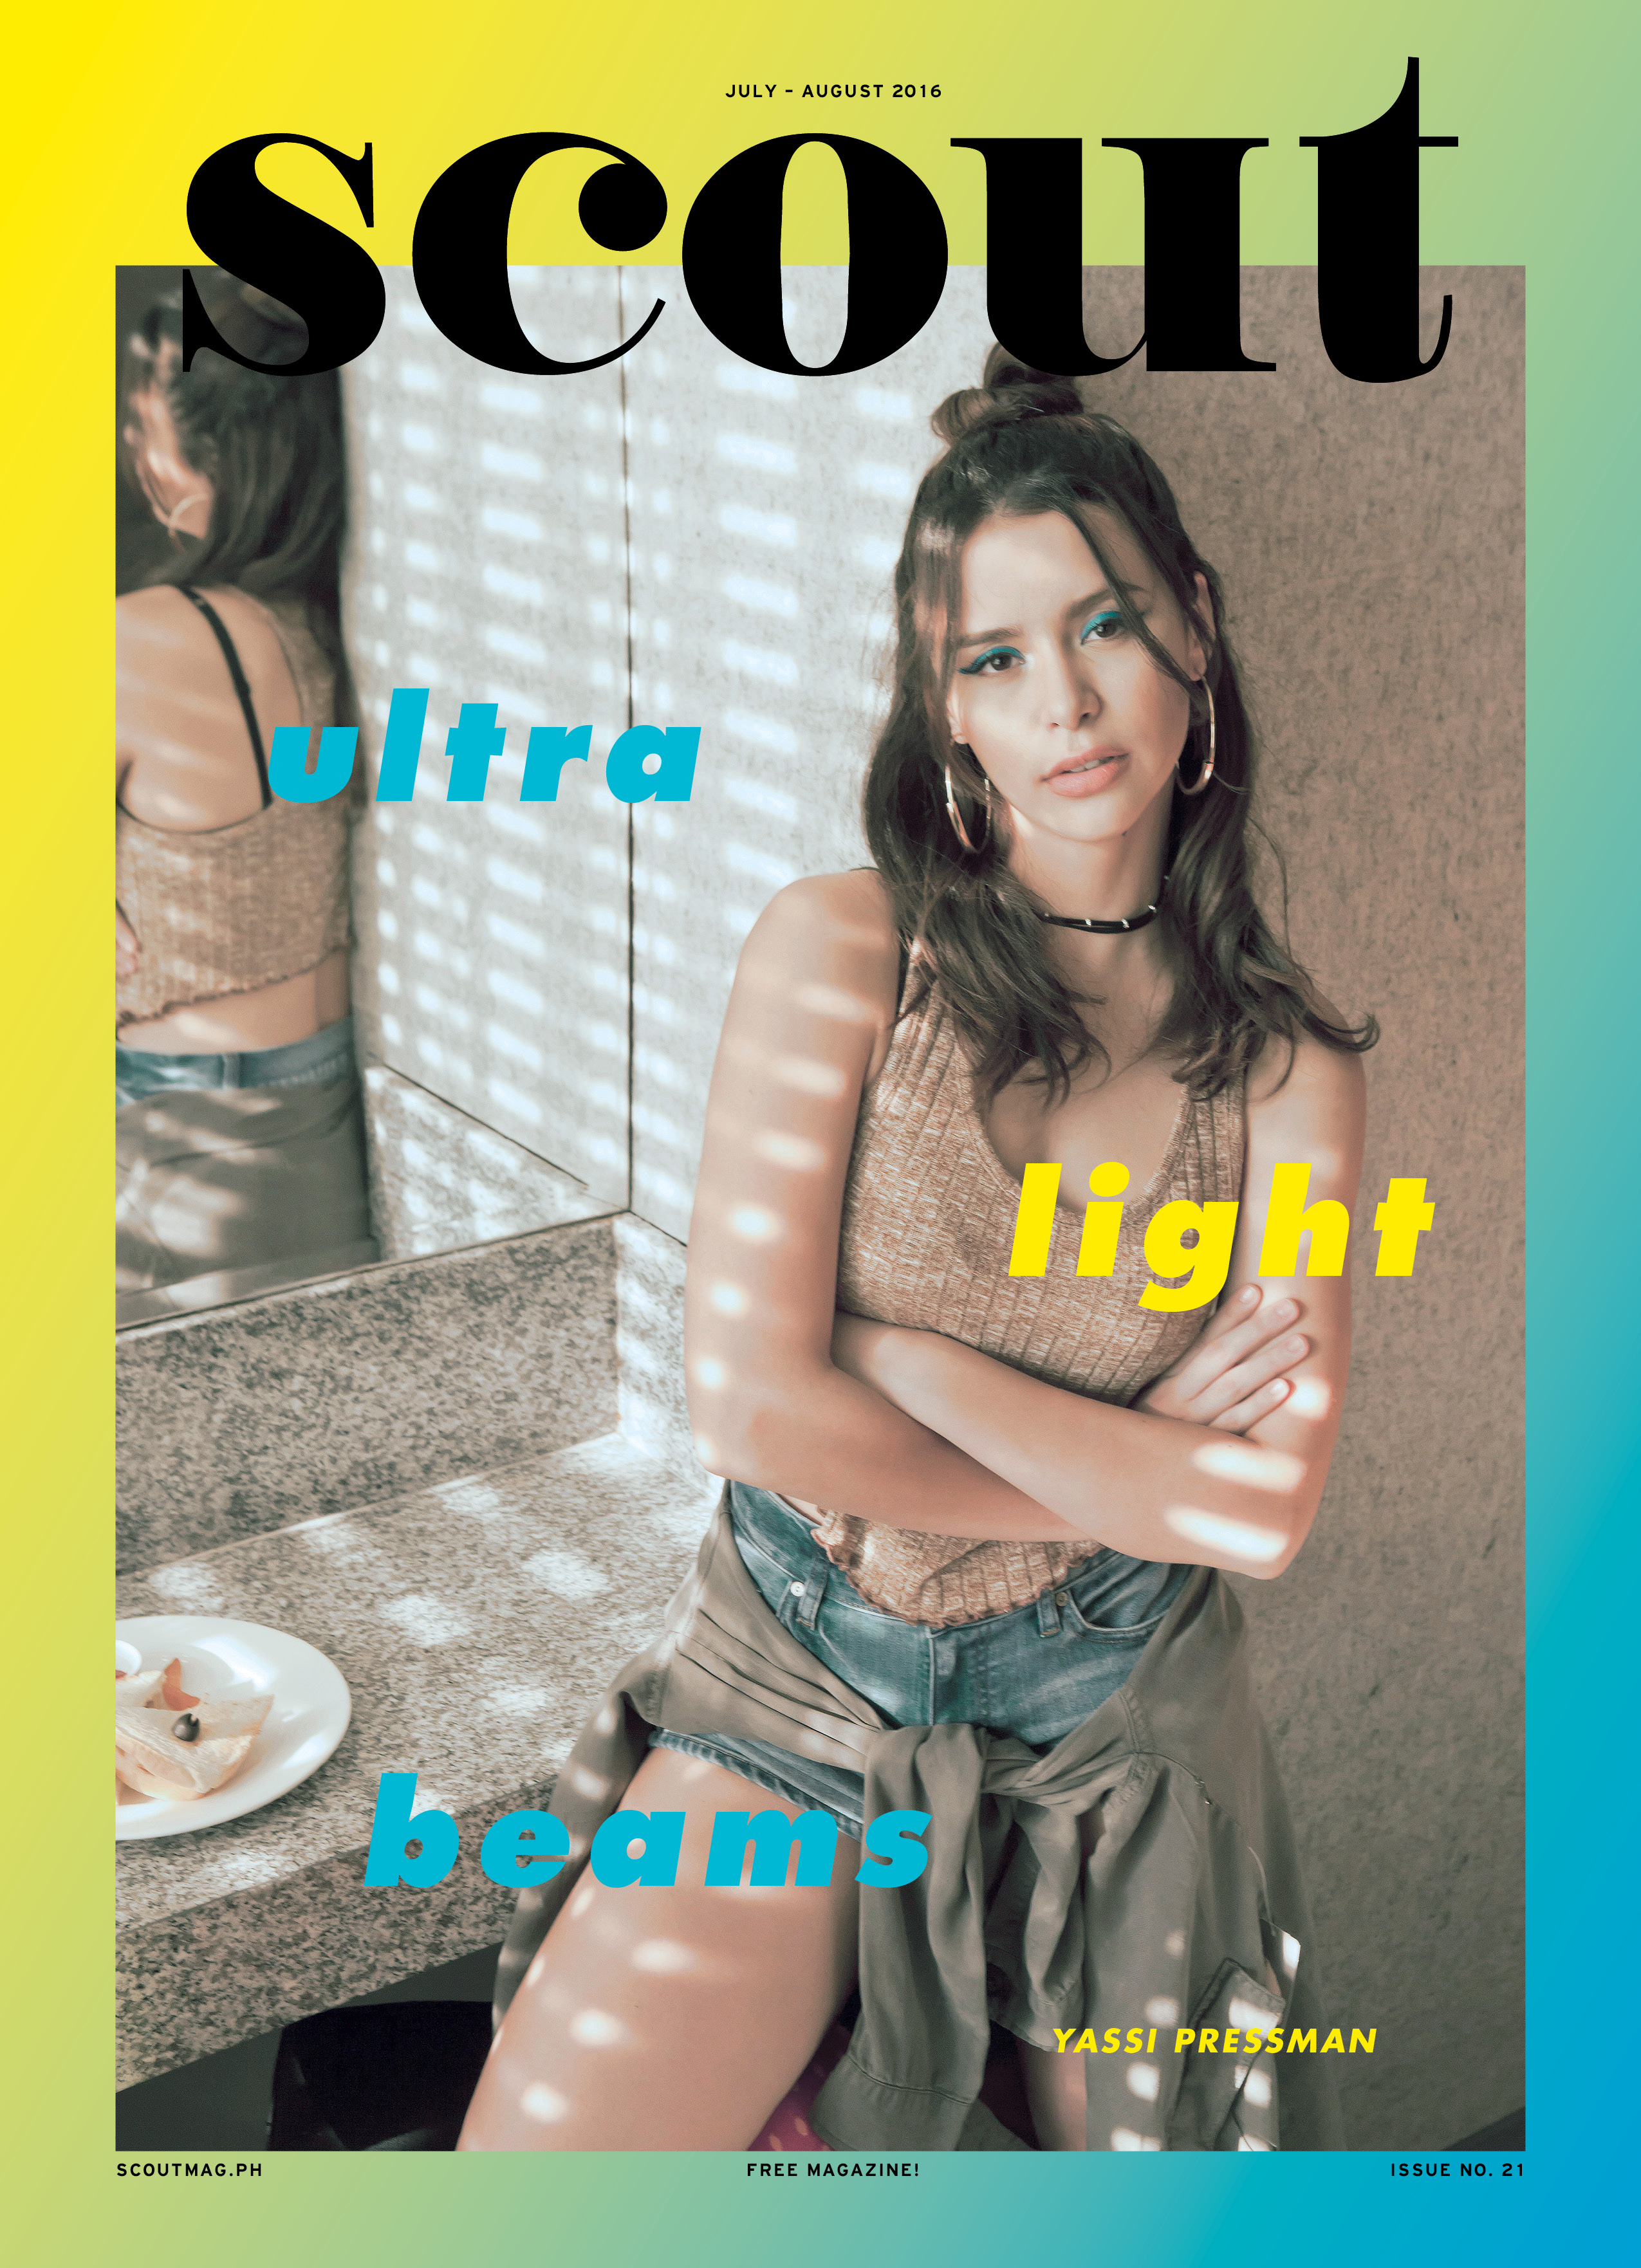 Yassi Pressman Is Scout’s July-August 2016 Cover Girl